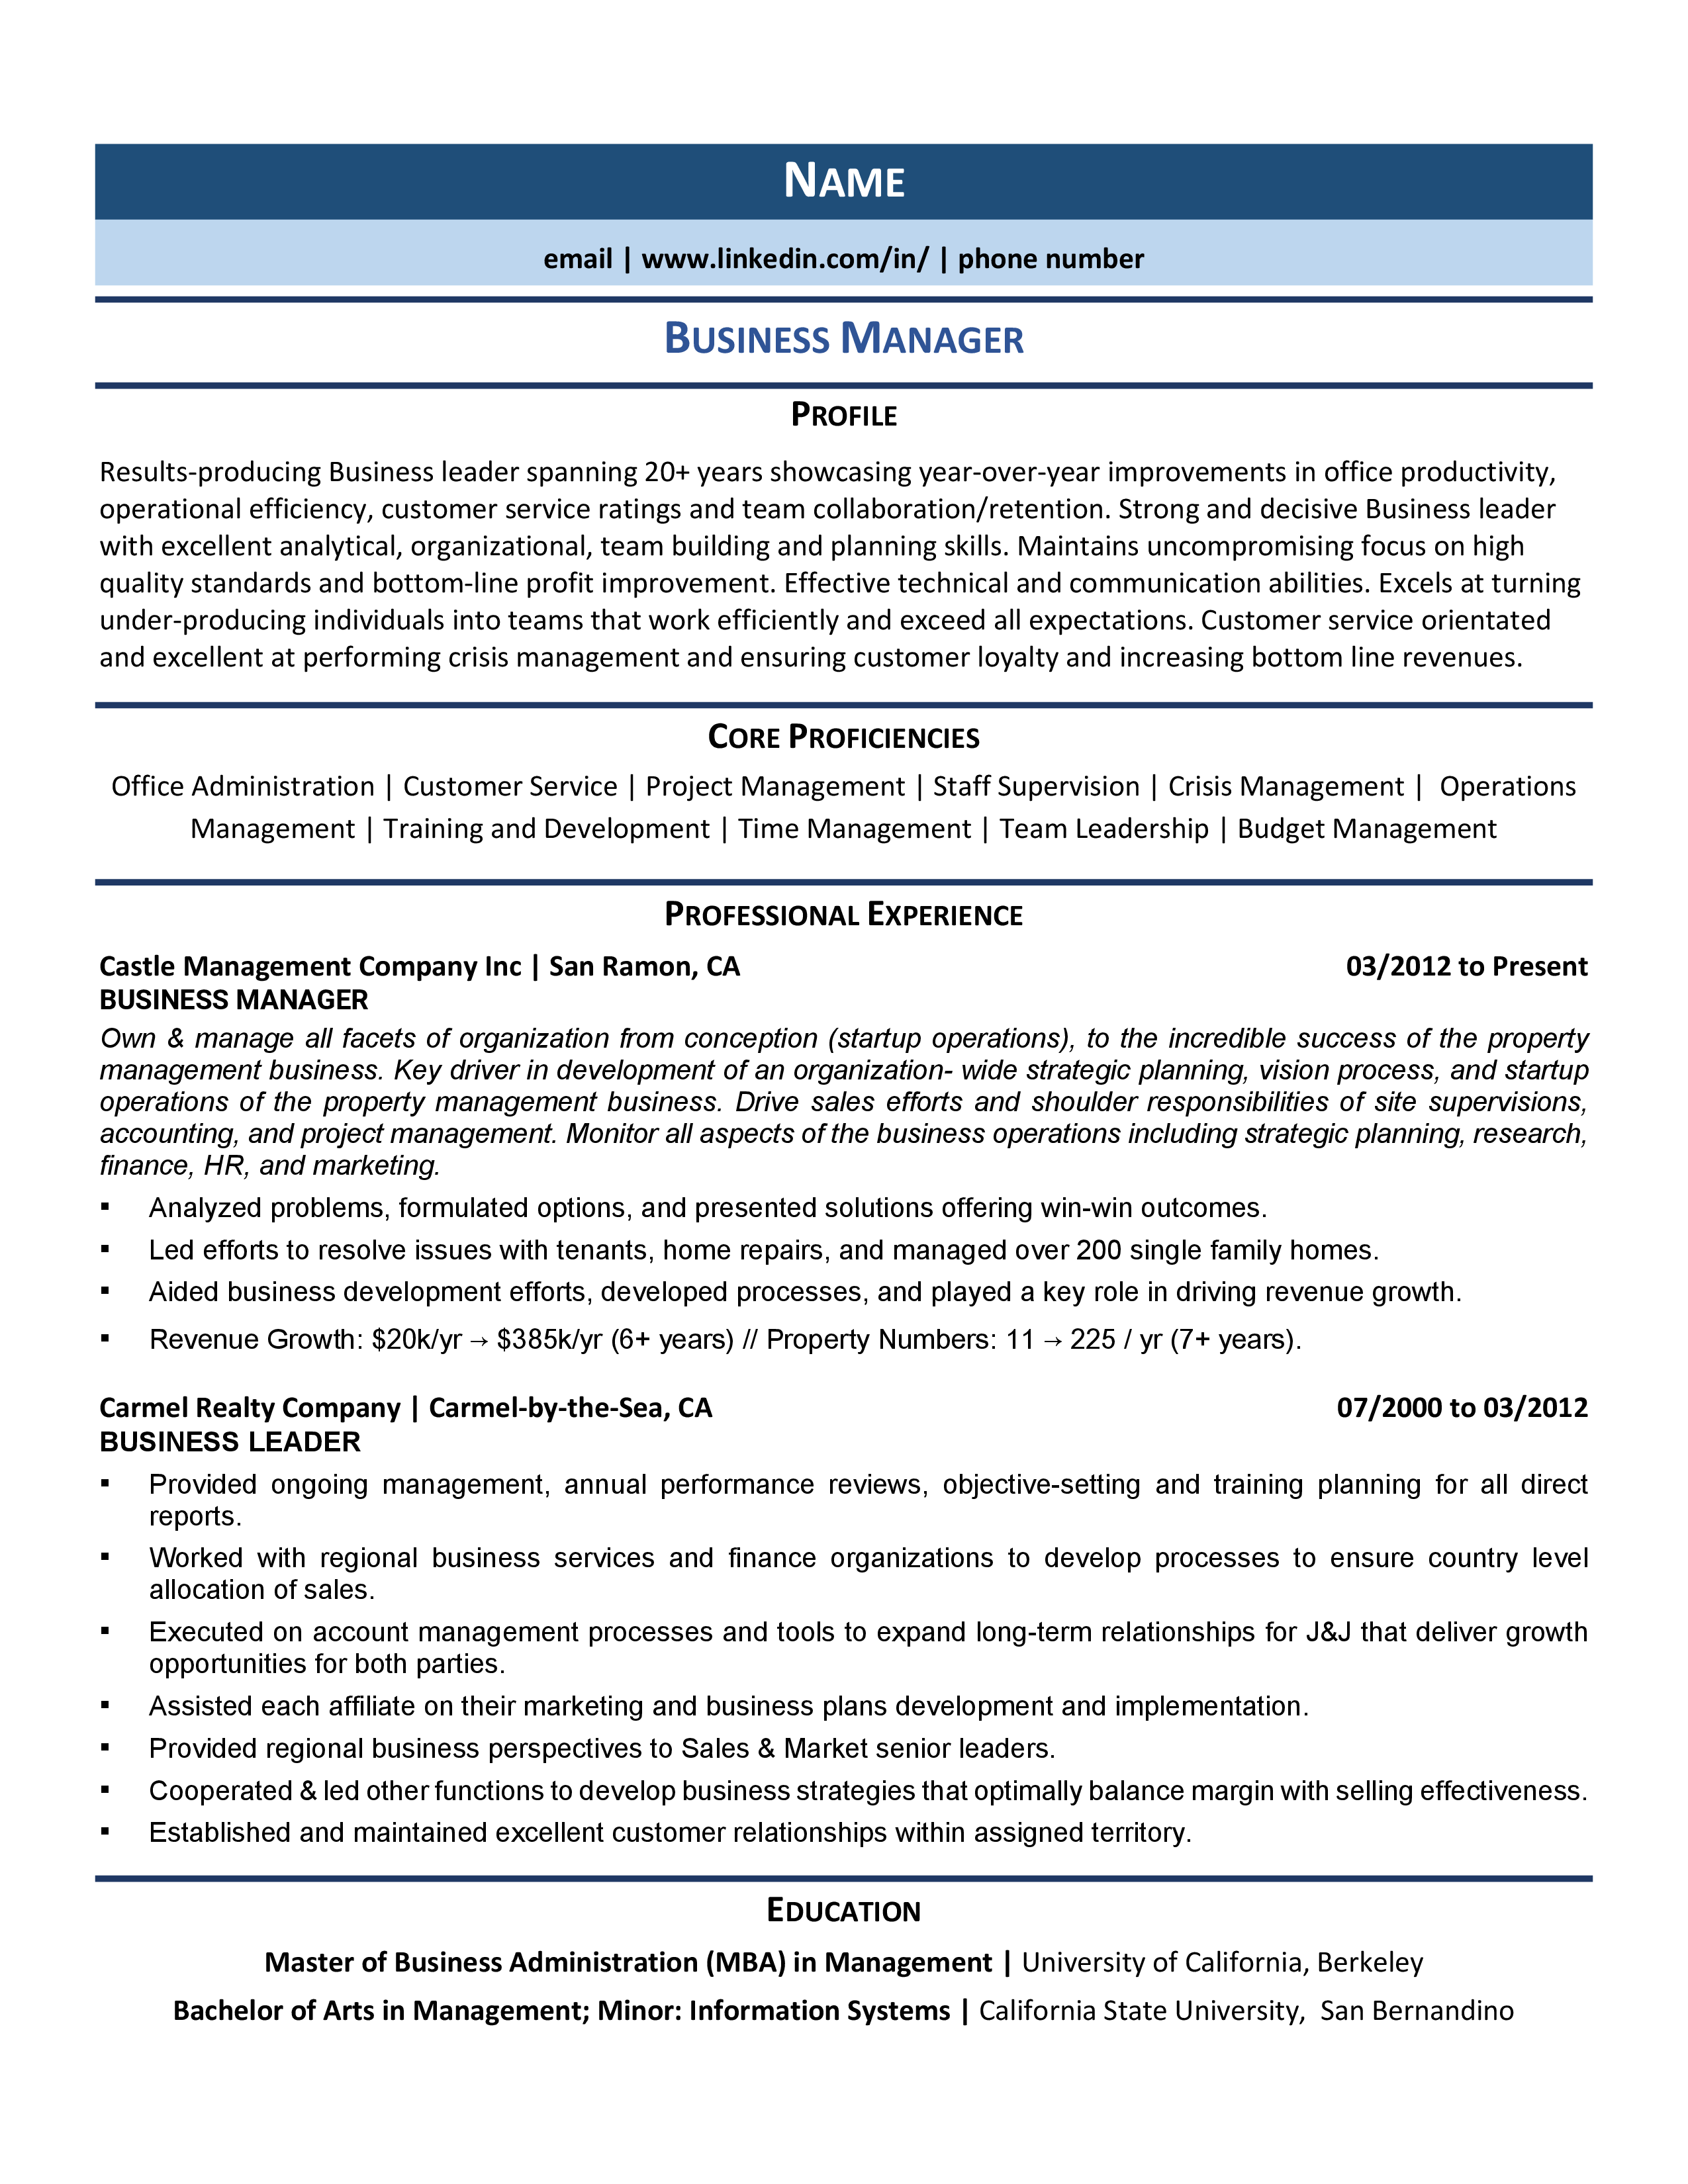 relevant coursework for business management resume